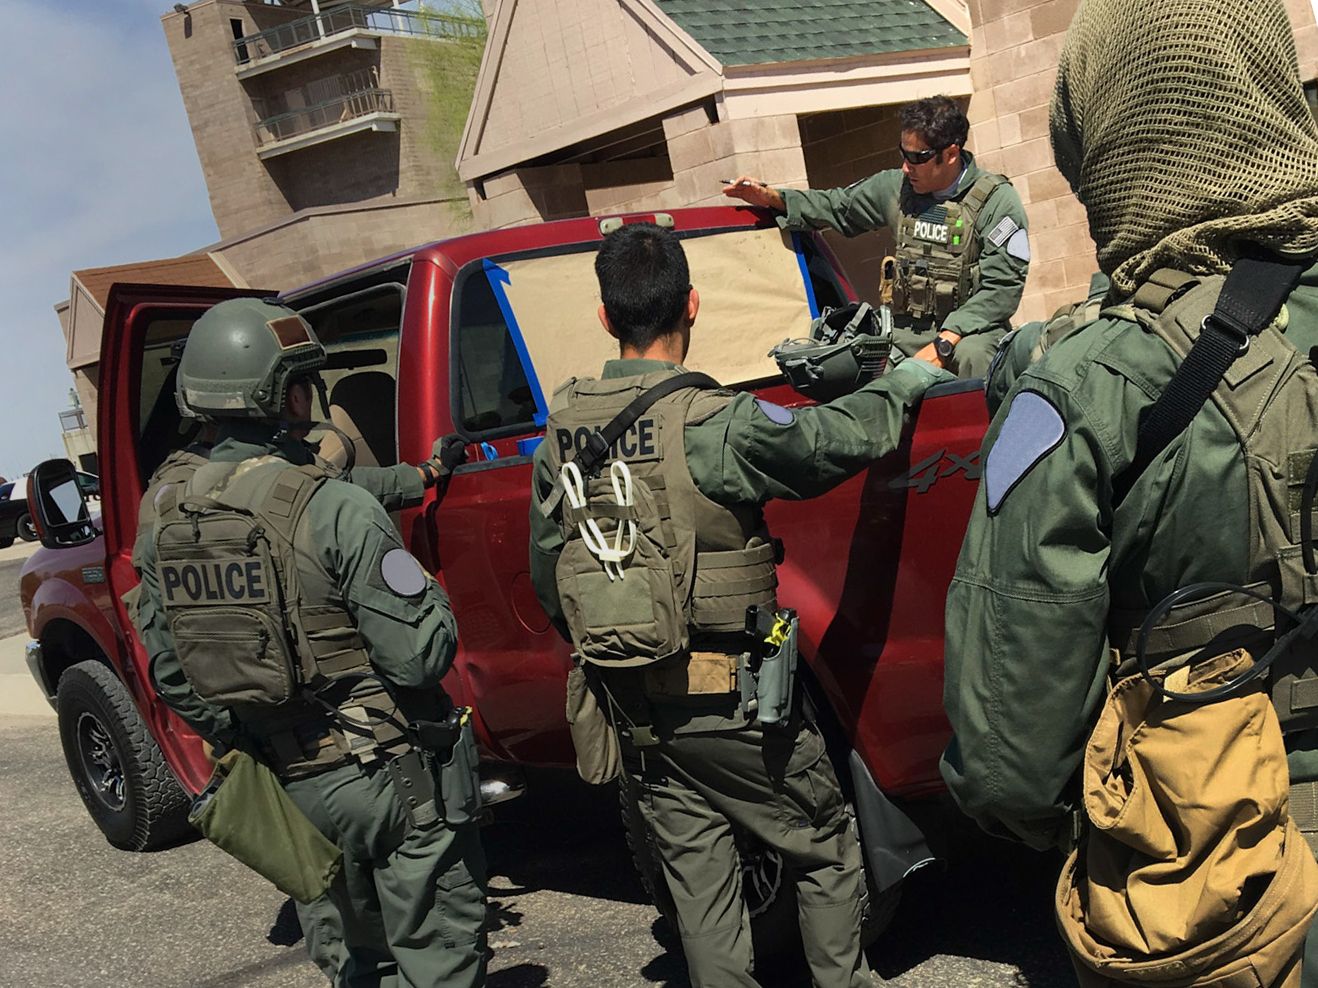 SWAT Small Unit training debriefing over the bed of a pickup truck